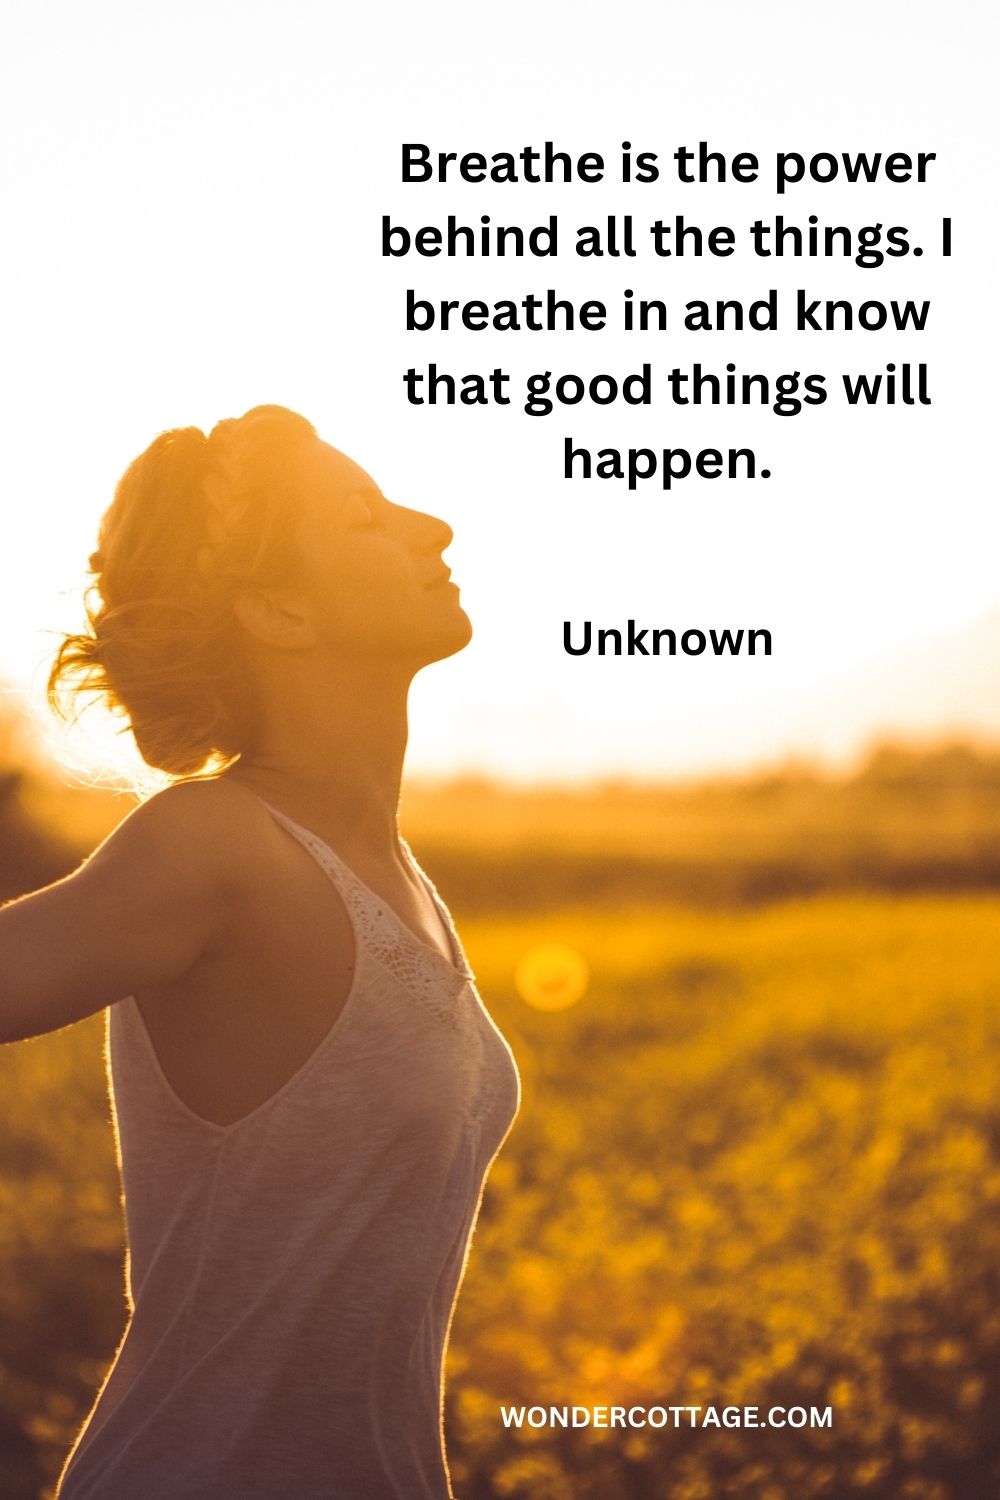 Breathe is the power behind all the things. I breathe in and know that good things will happen. Unknown